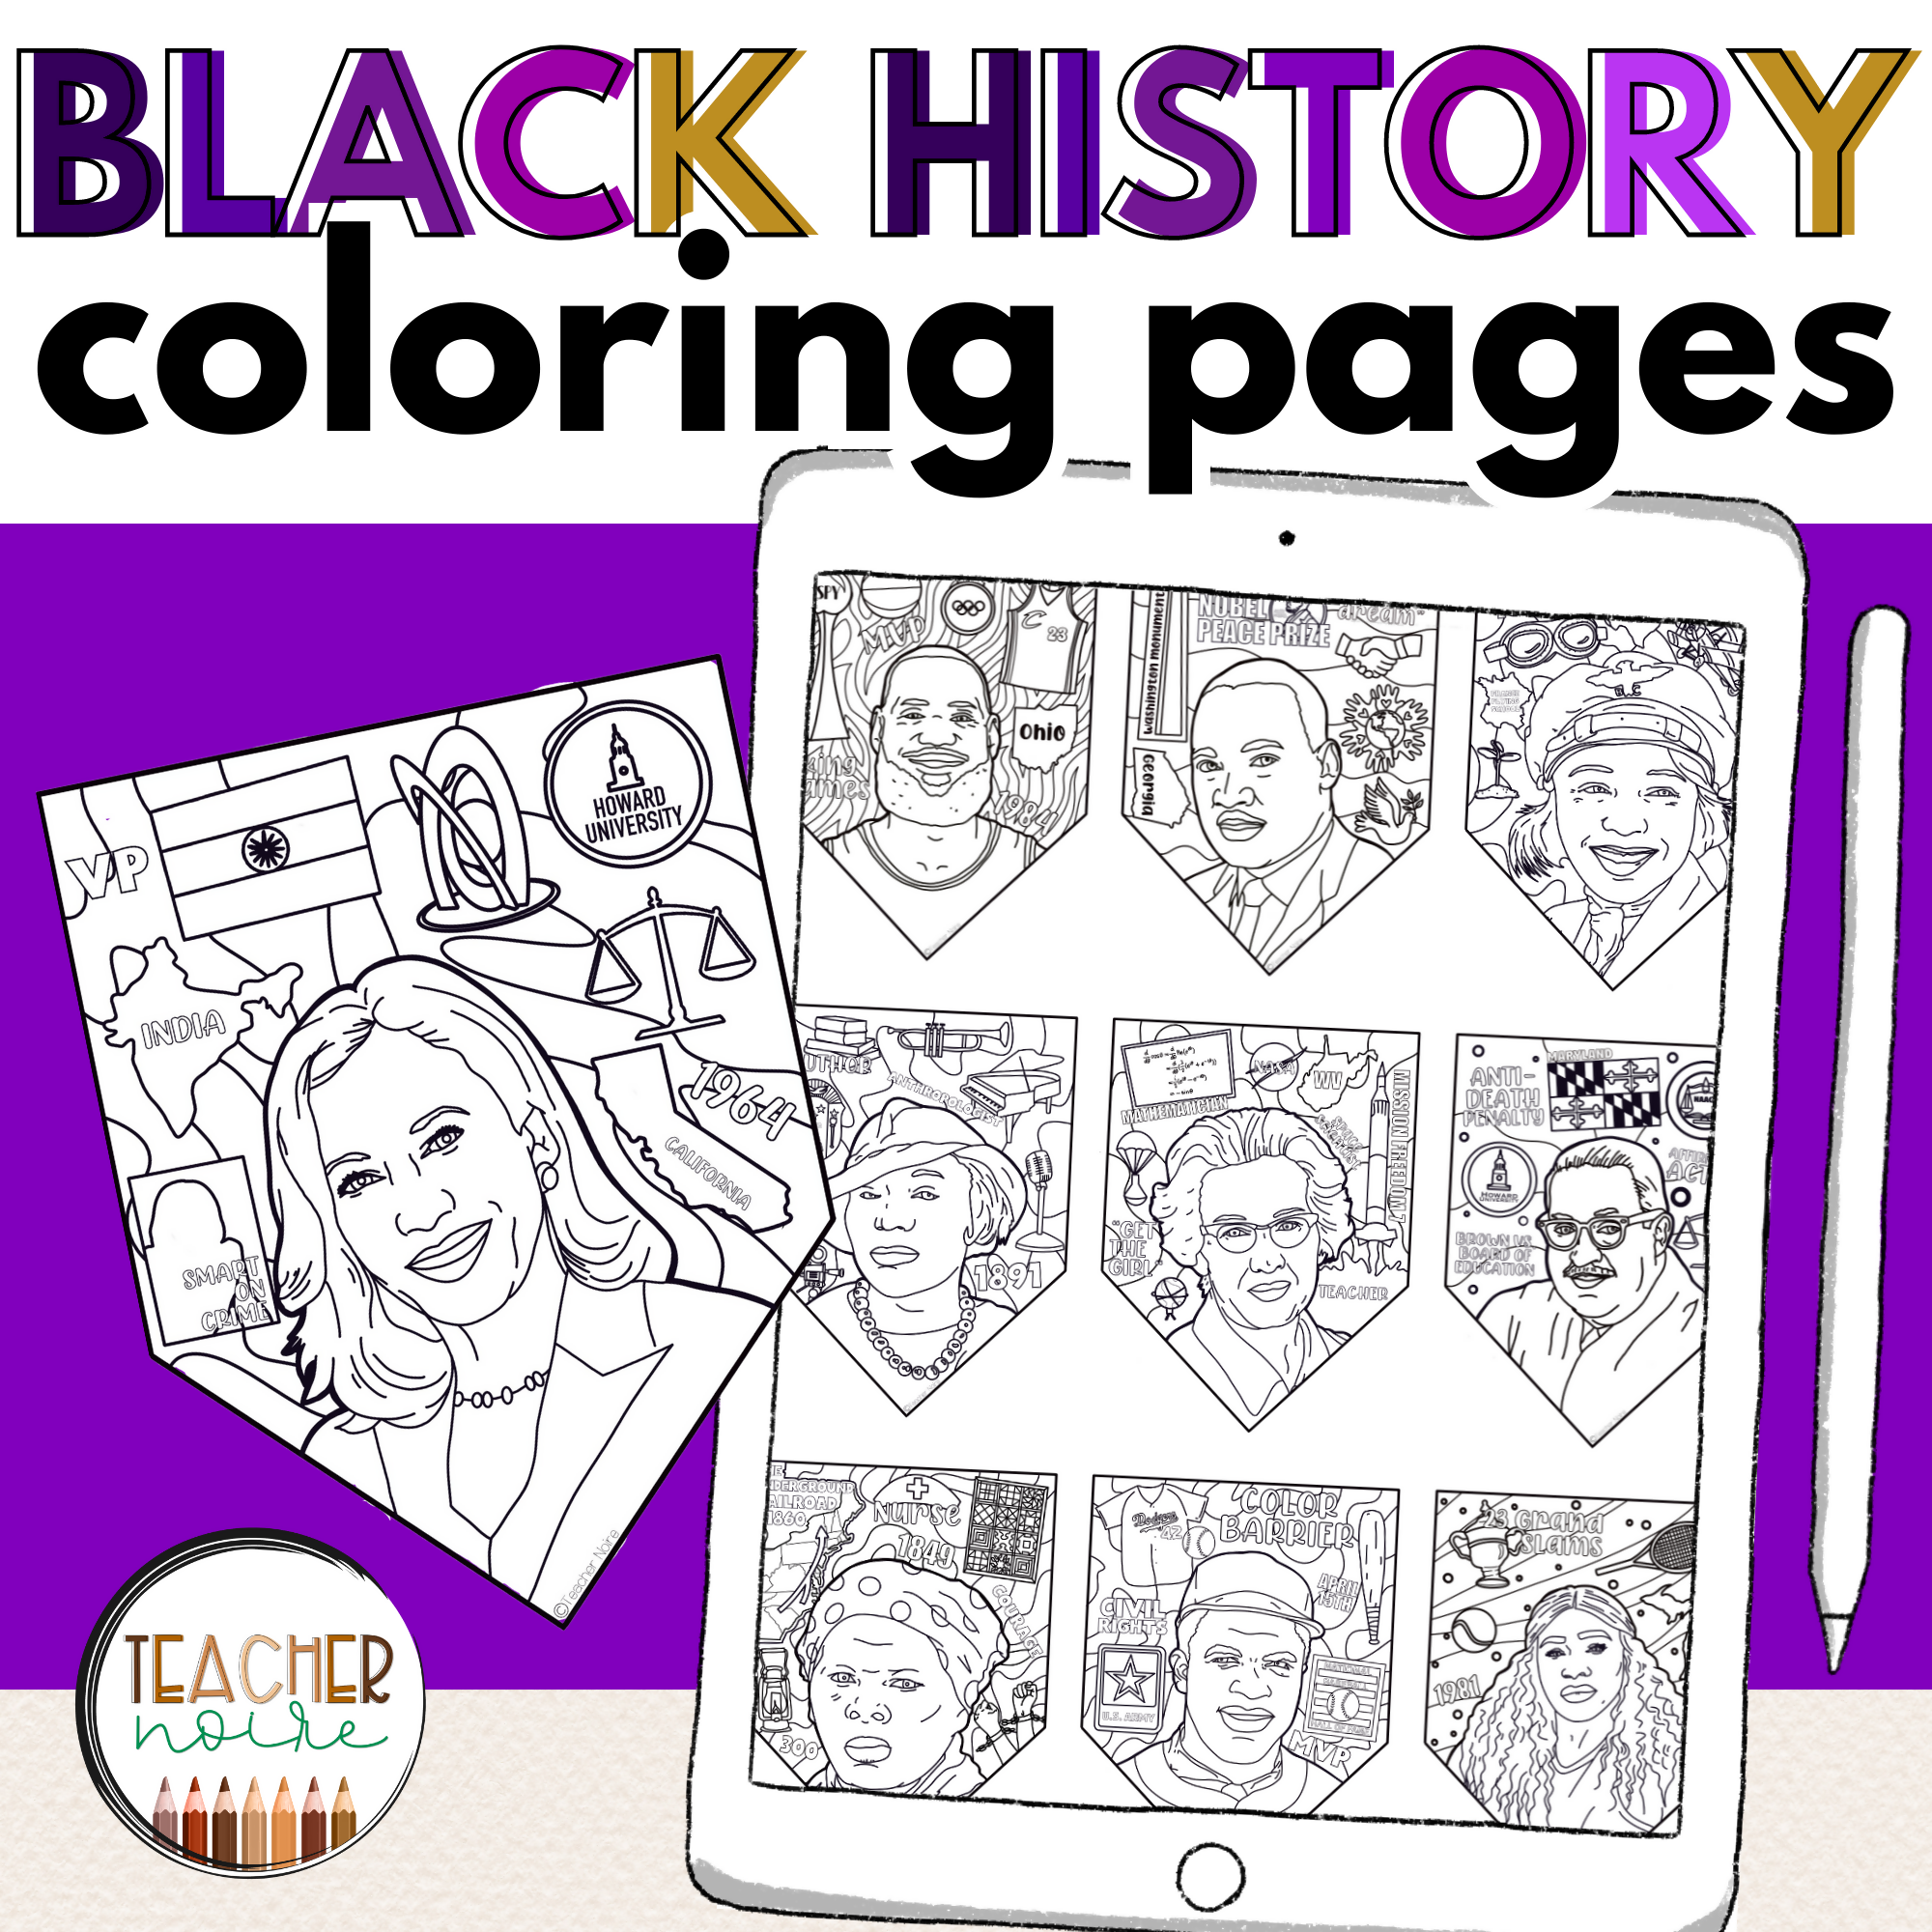 Black history month coloring pages â schoolgirl style